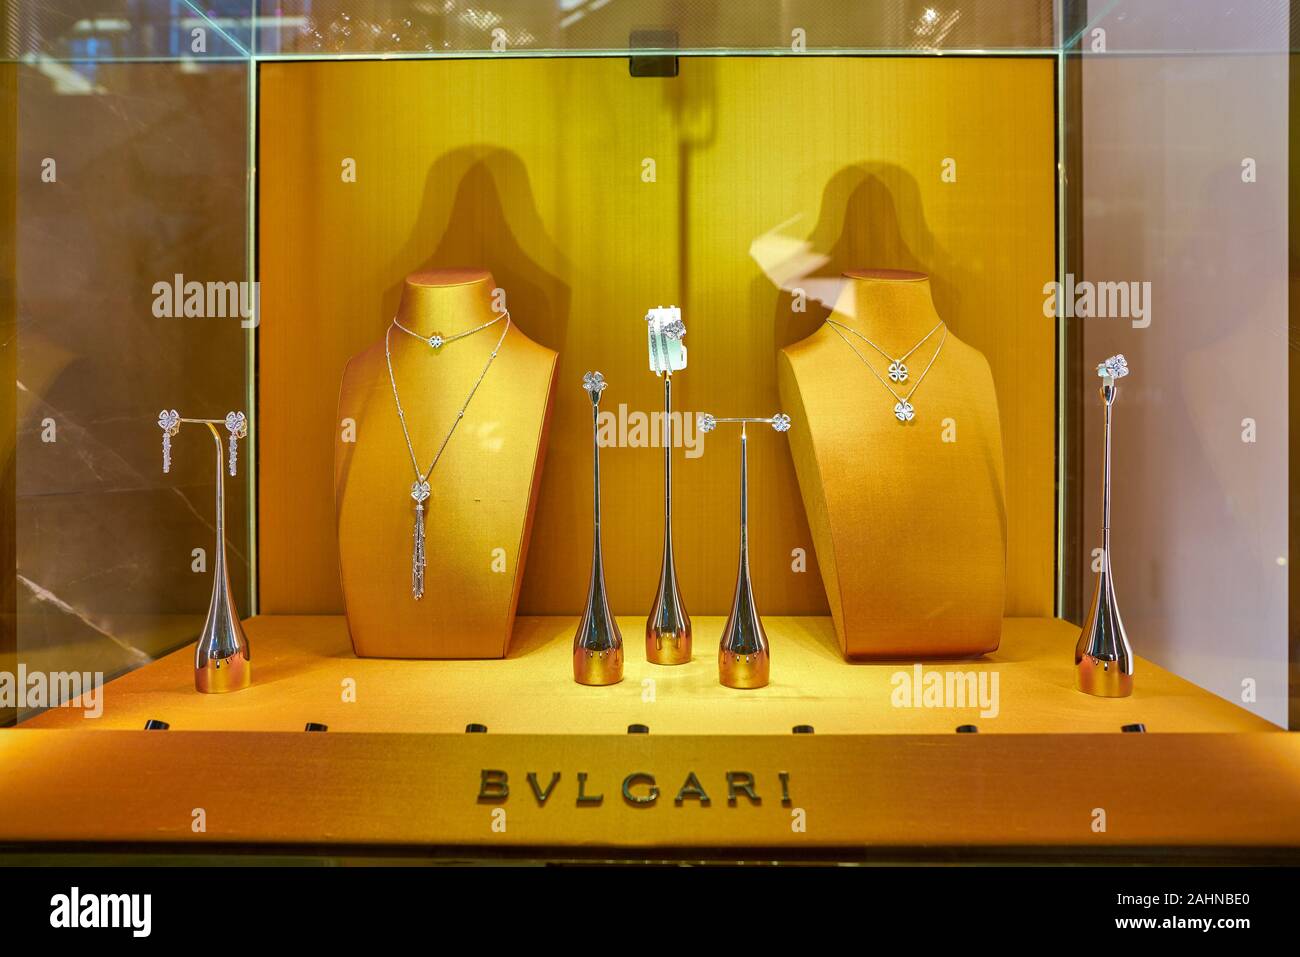 SINGAPORE - CIRCA APRIL, 2019: Bvlgari accessories on display at a store in the Shoppes at Marina Bay Sands. Stock Photo